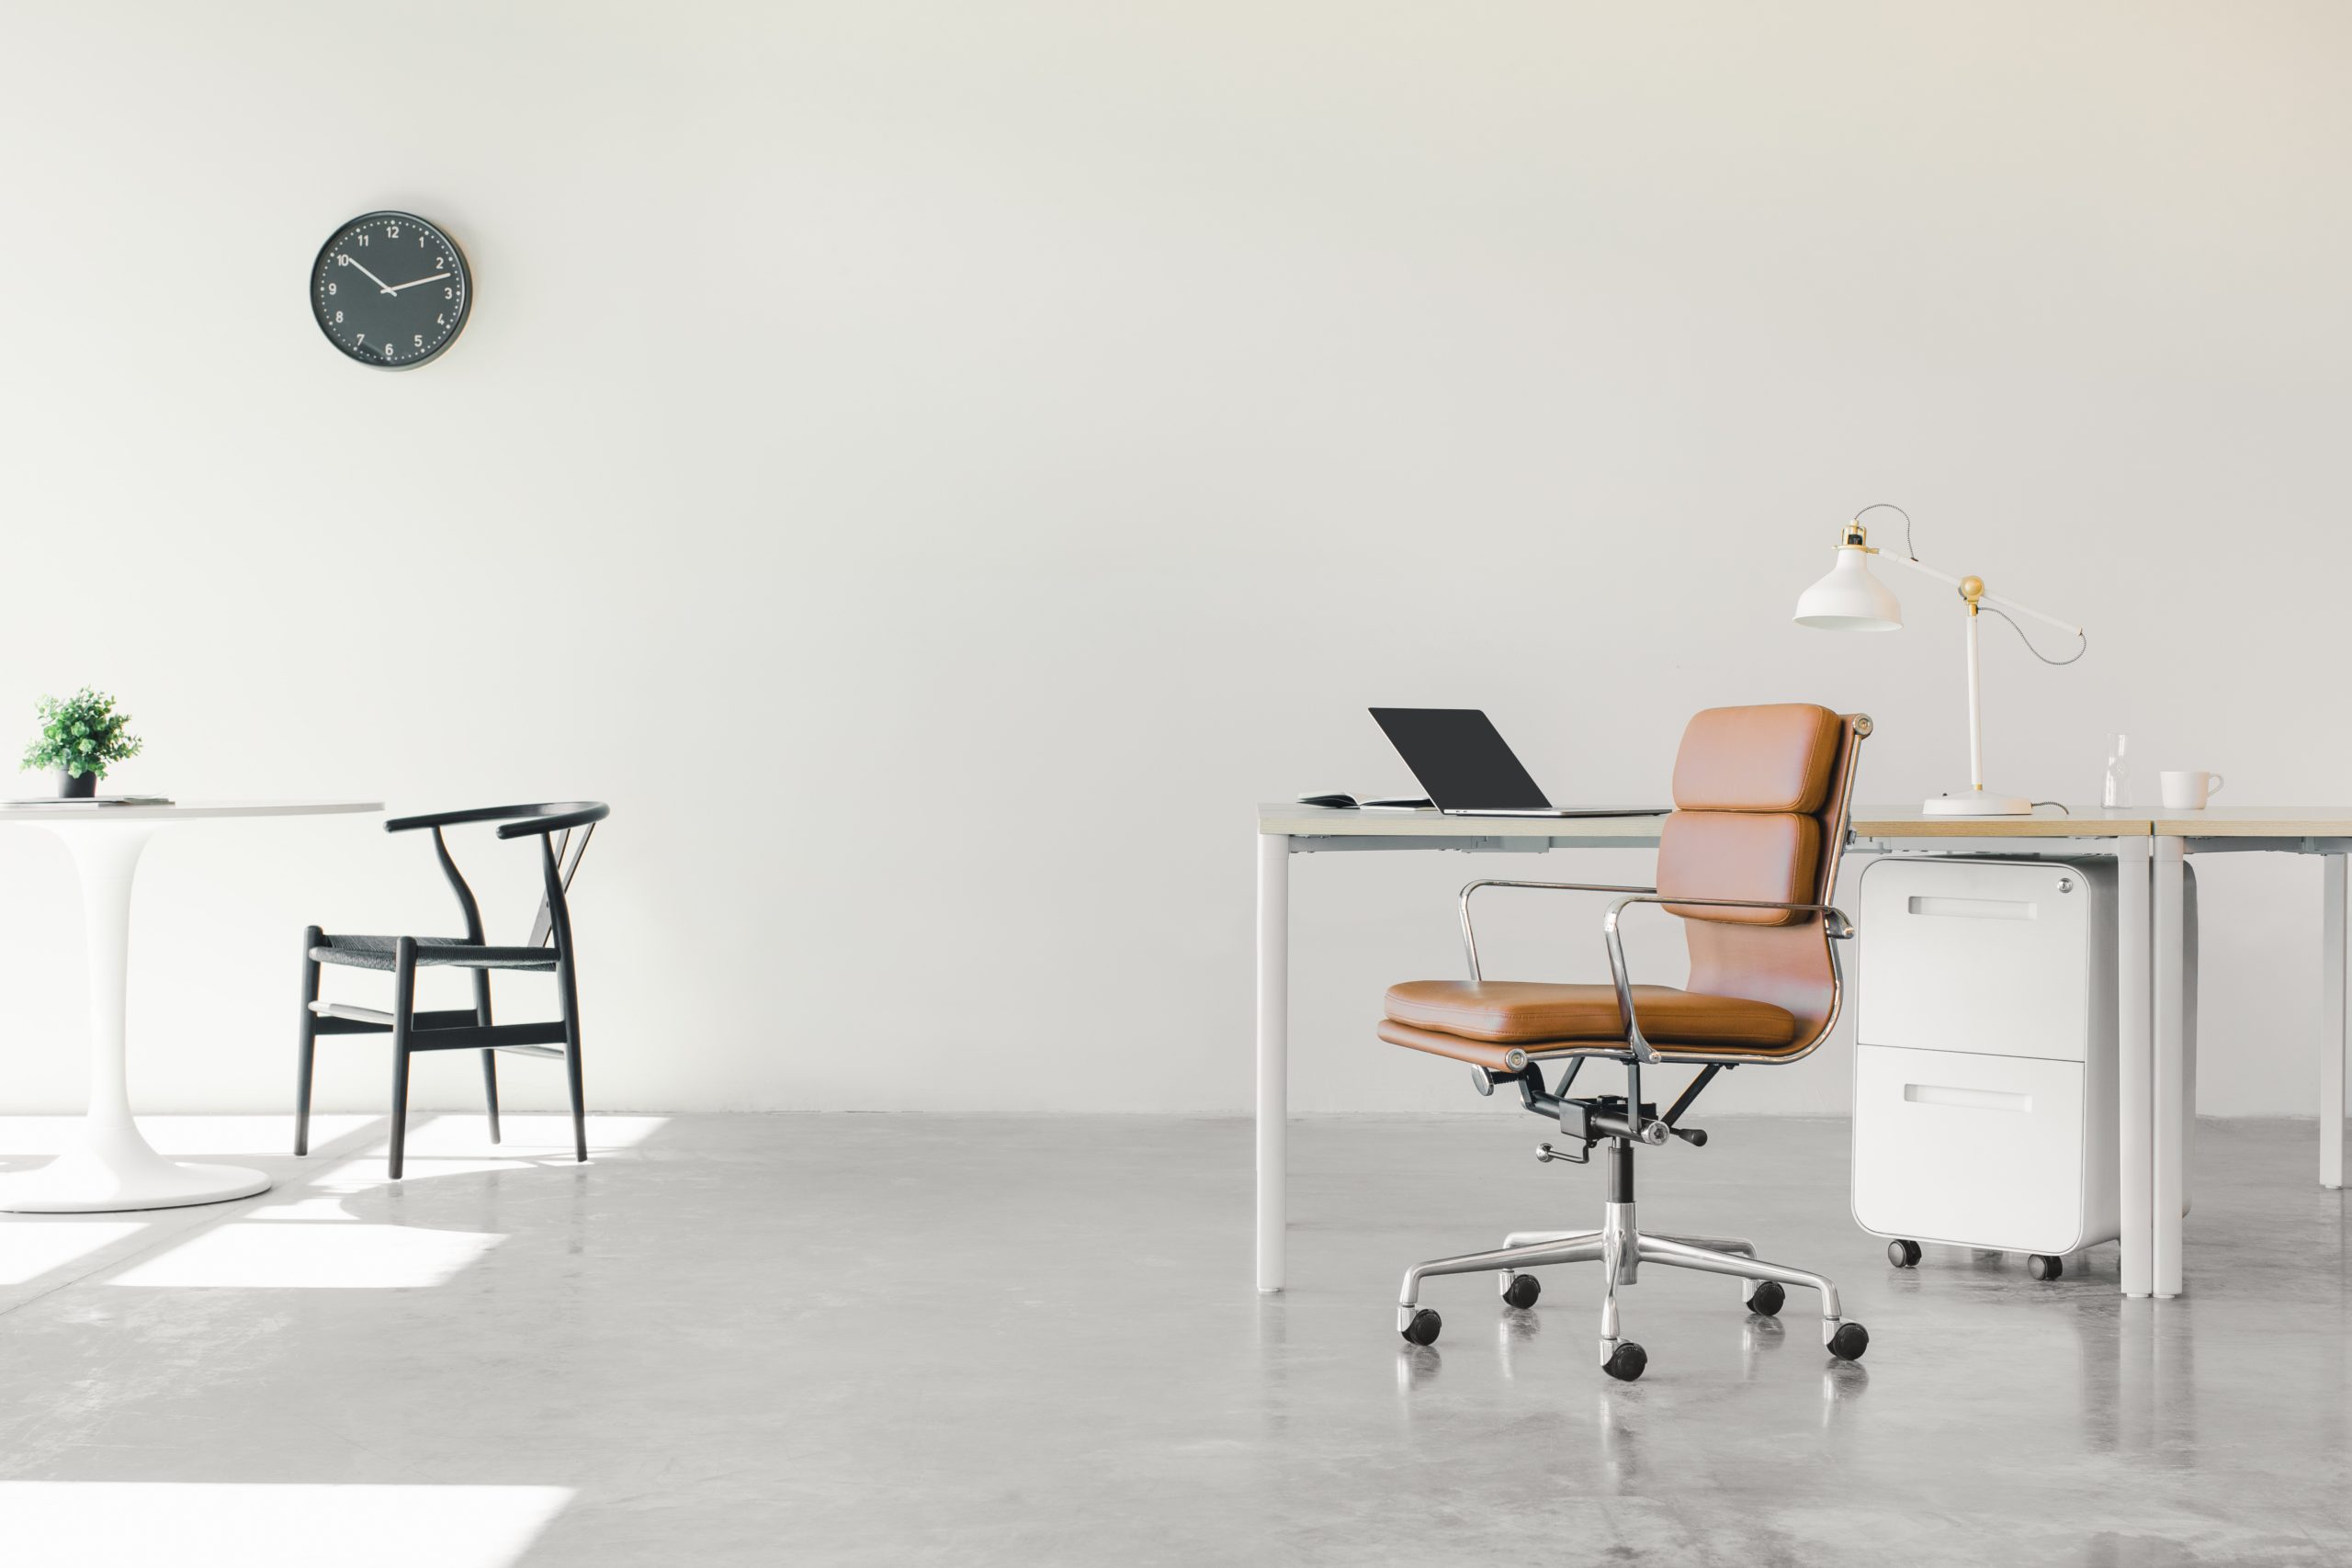 An open floor plan office space with a minimalist setup of chairs and desks.